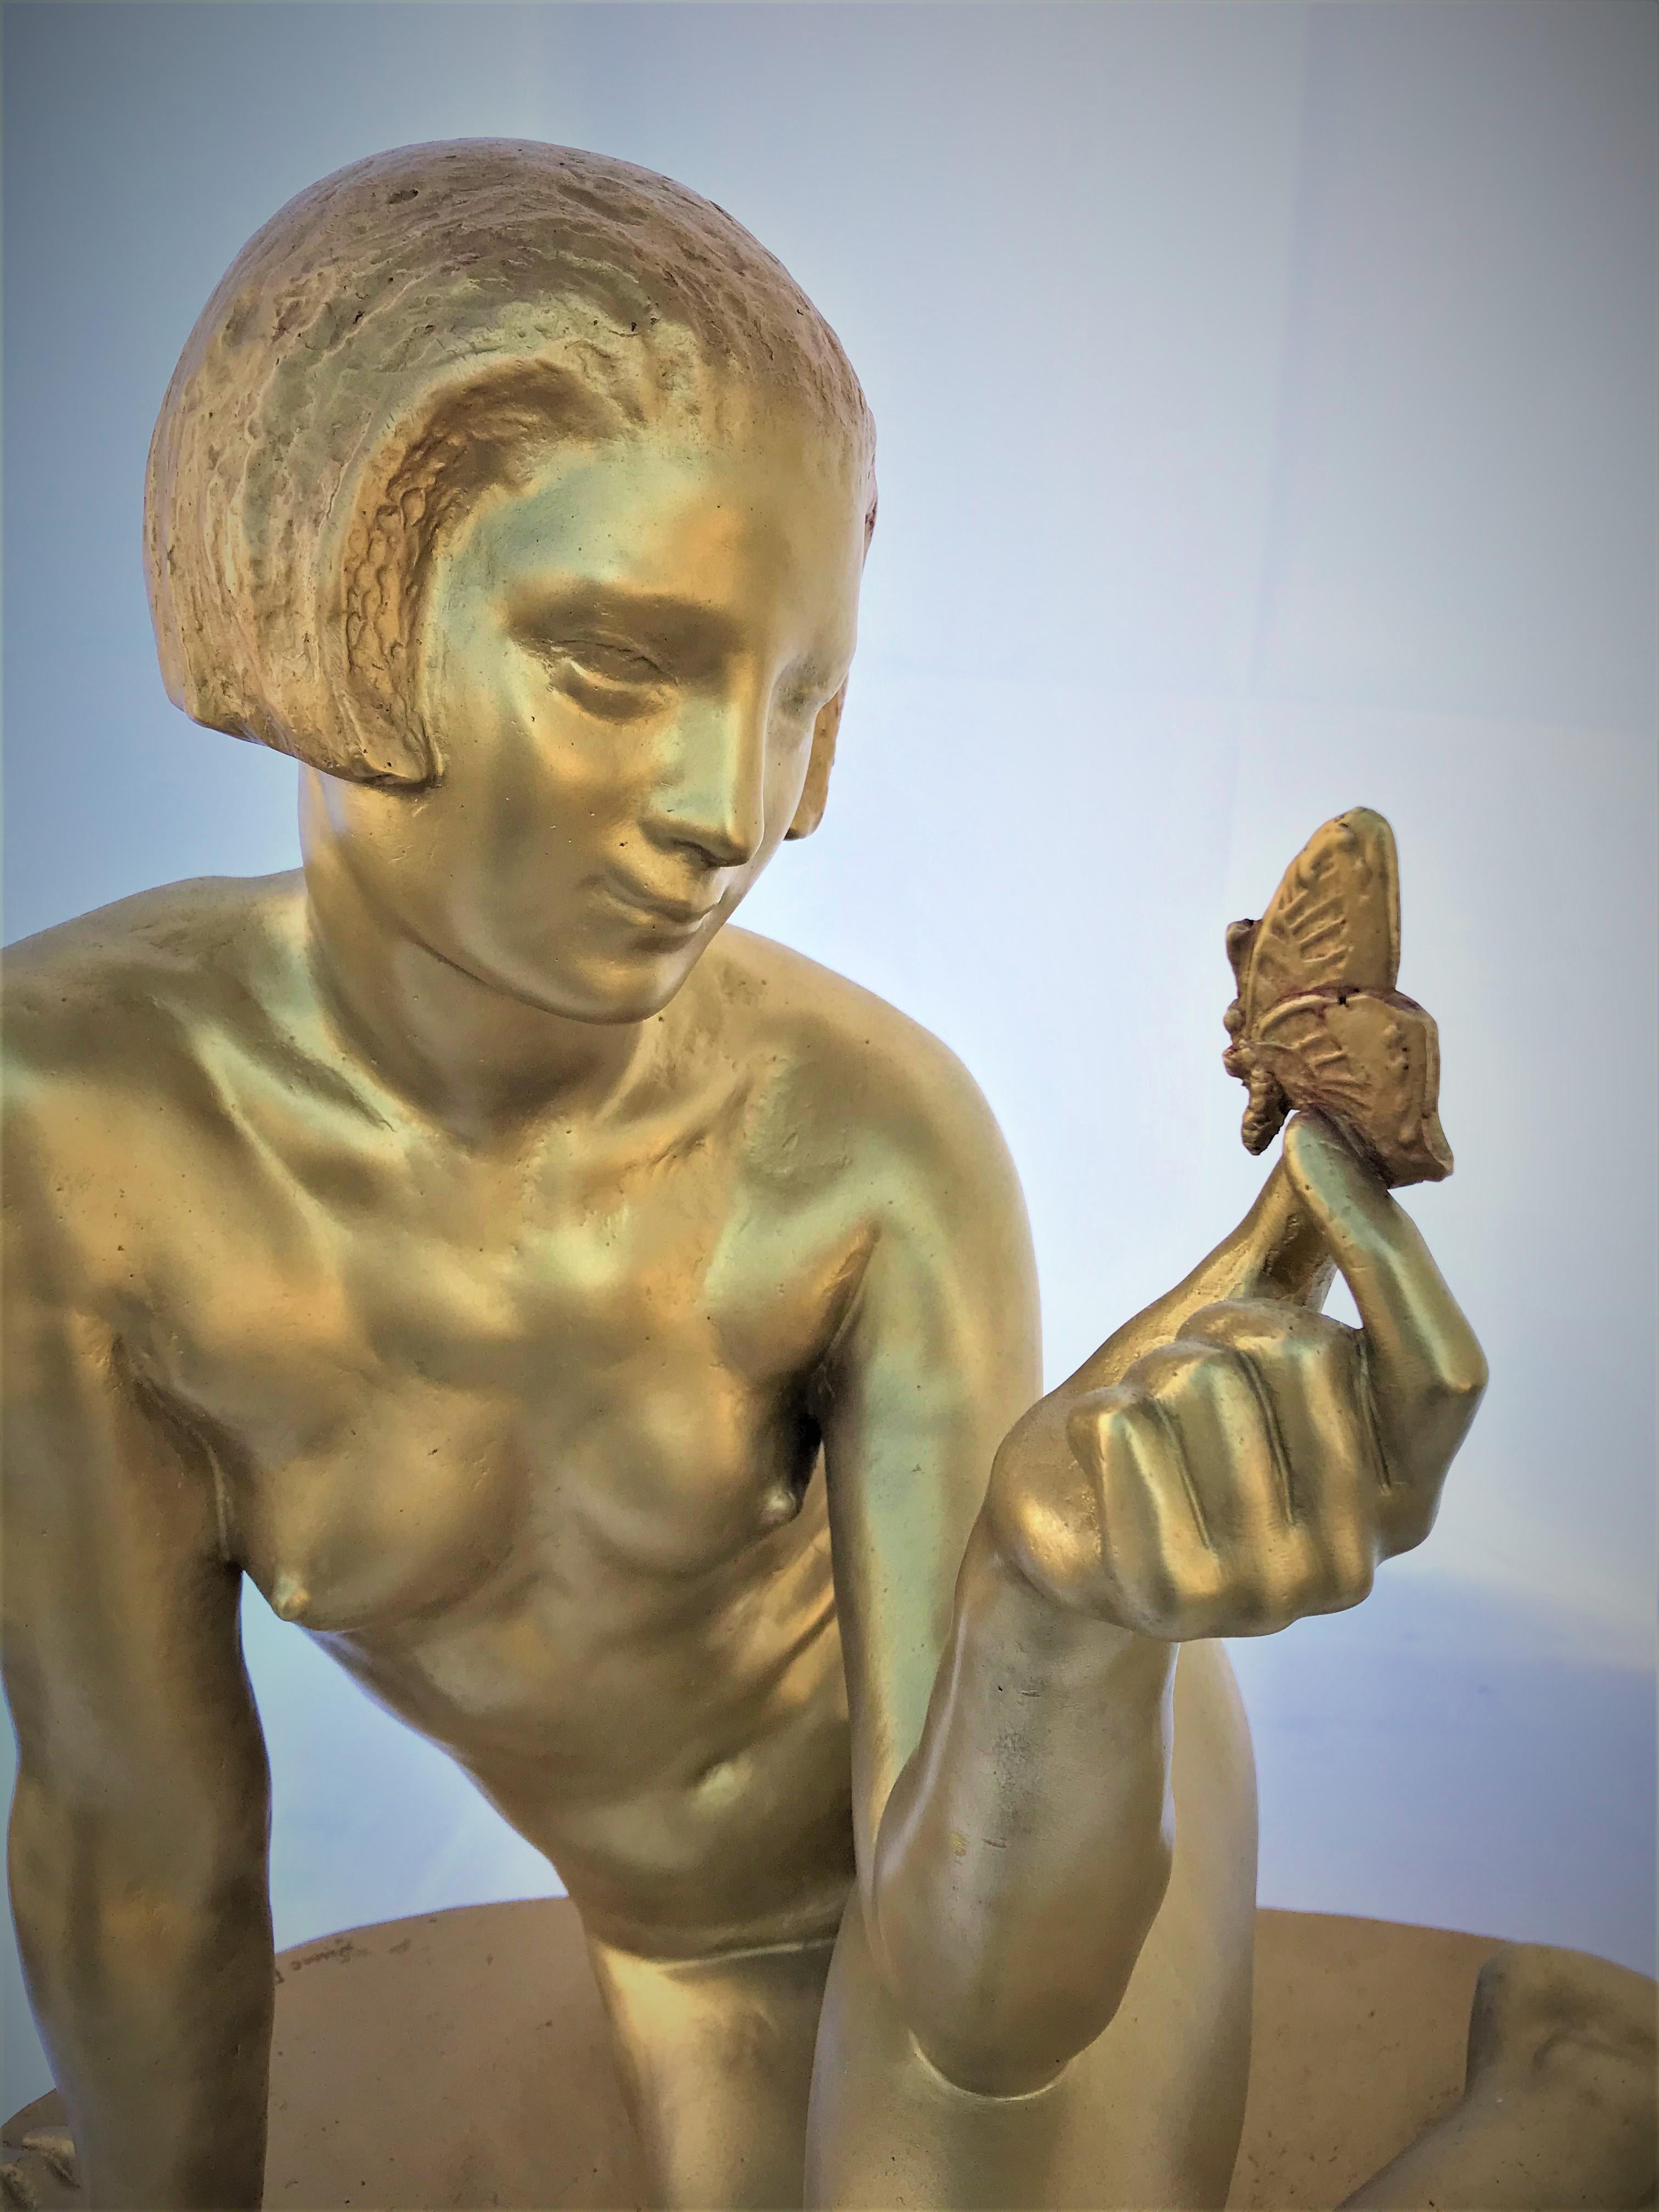 Good size sculpture of a young girl with a butterfly in her hand. Signed and marked signature on the back side. Has a golden painted finish. Signed; Albert Pstrissp and Perdue Paris. Not sure of the date. Good size at 19 